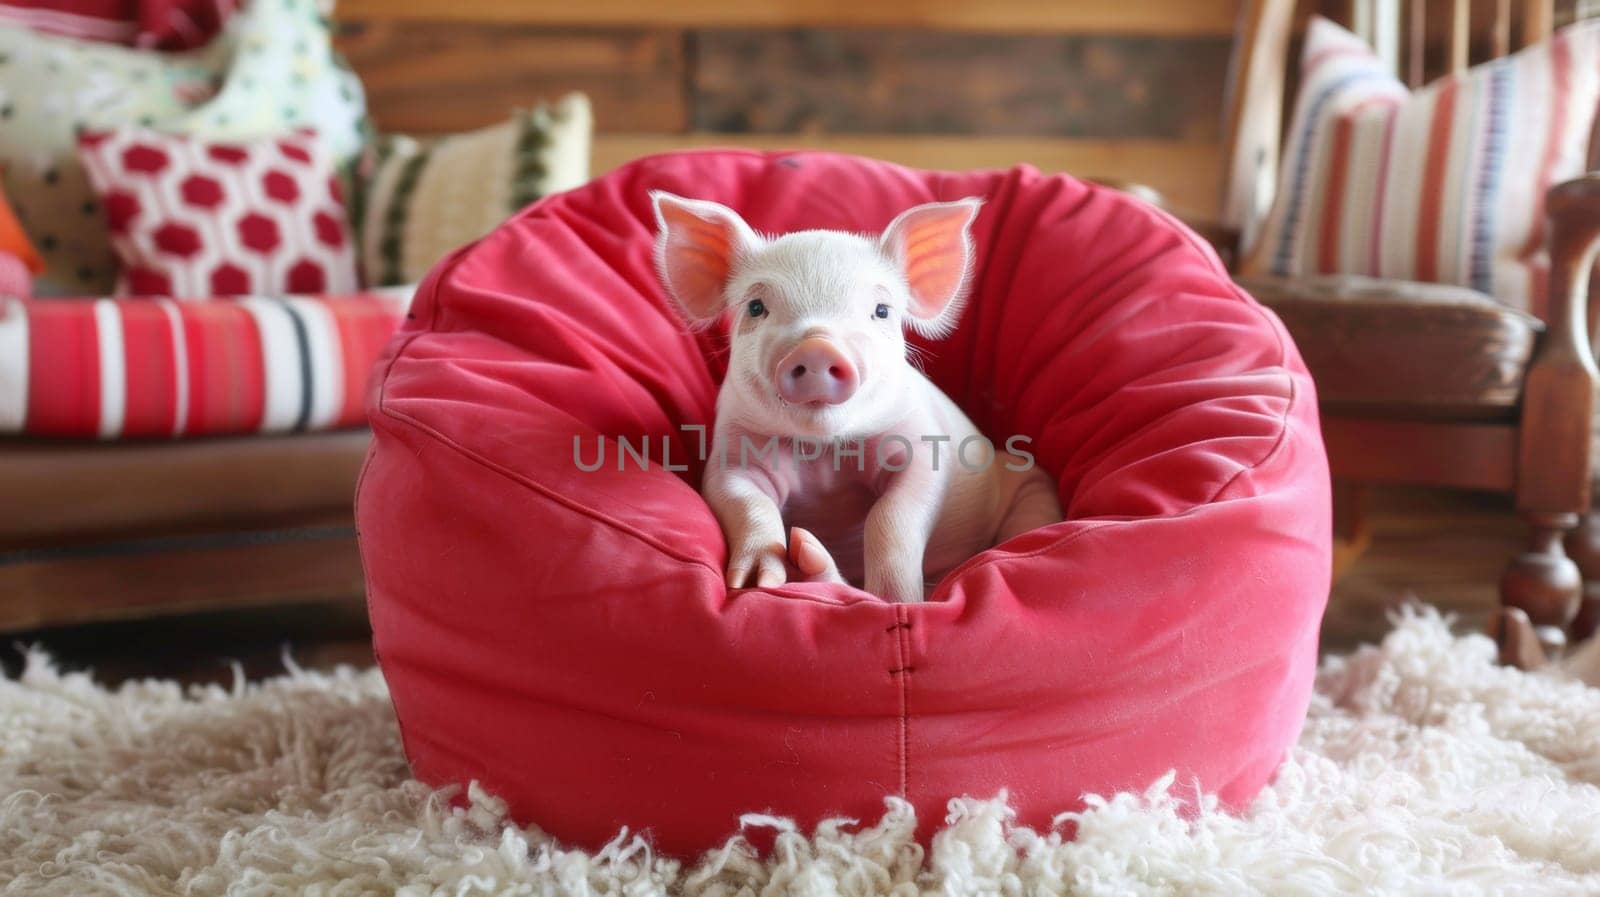 A small pig sitting in a bean bag on top of the rug, AI by starush